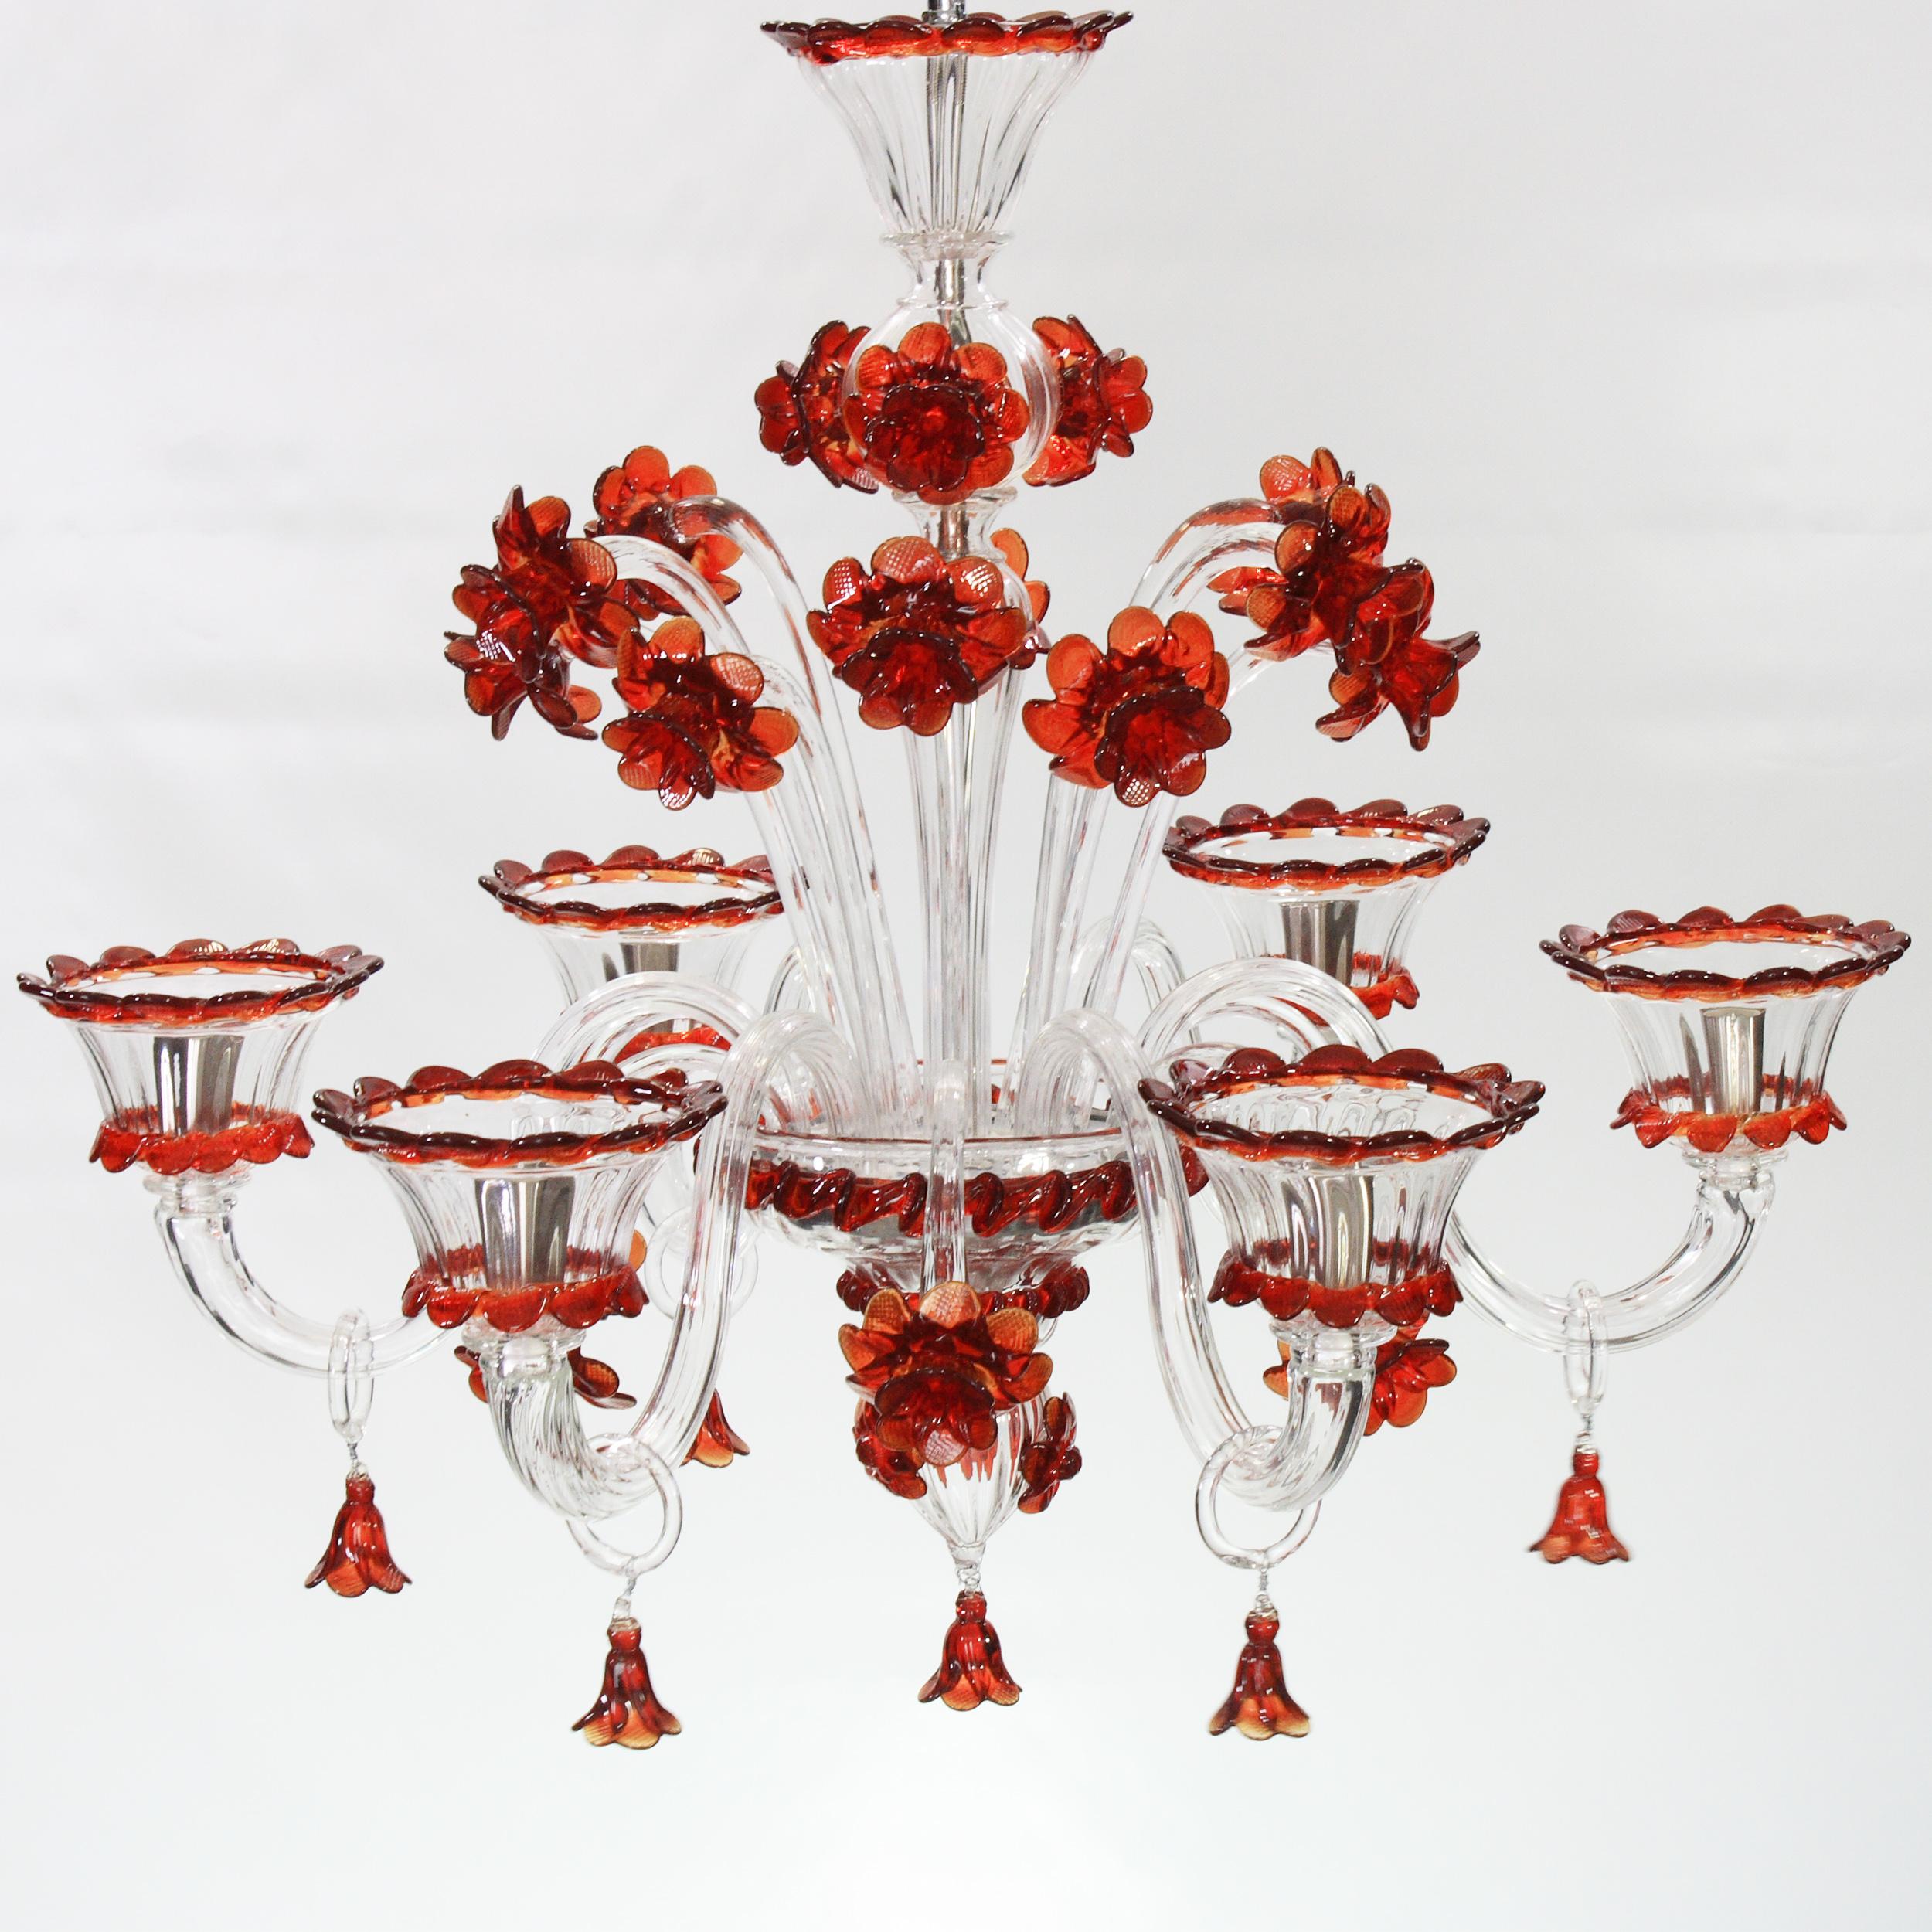 Artistic chandelier 6 lights clear Murano glass and red flowers and details  by Multiforme
This is a classic chandelier composed by a multitude of red flowers. There are also many other details in red galss on the cups and on the arms. 
Our glass